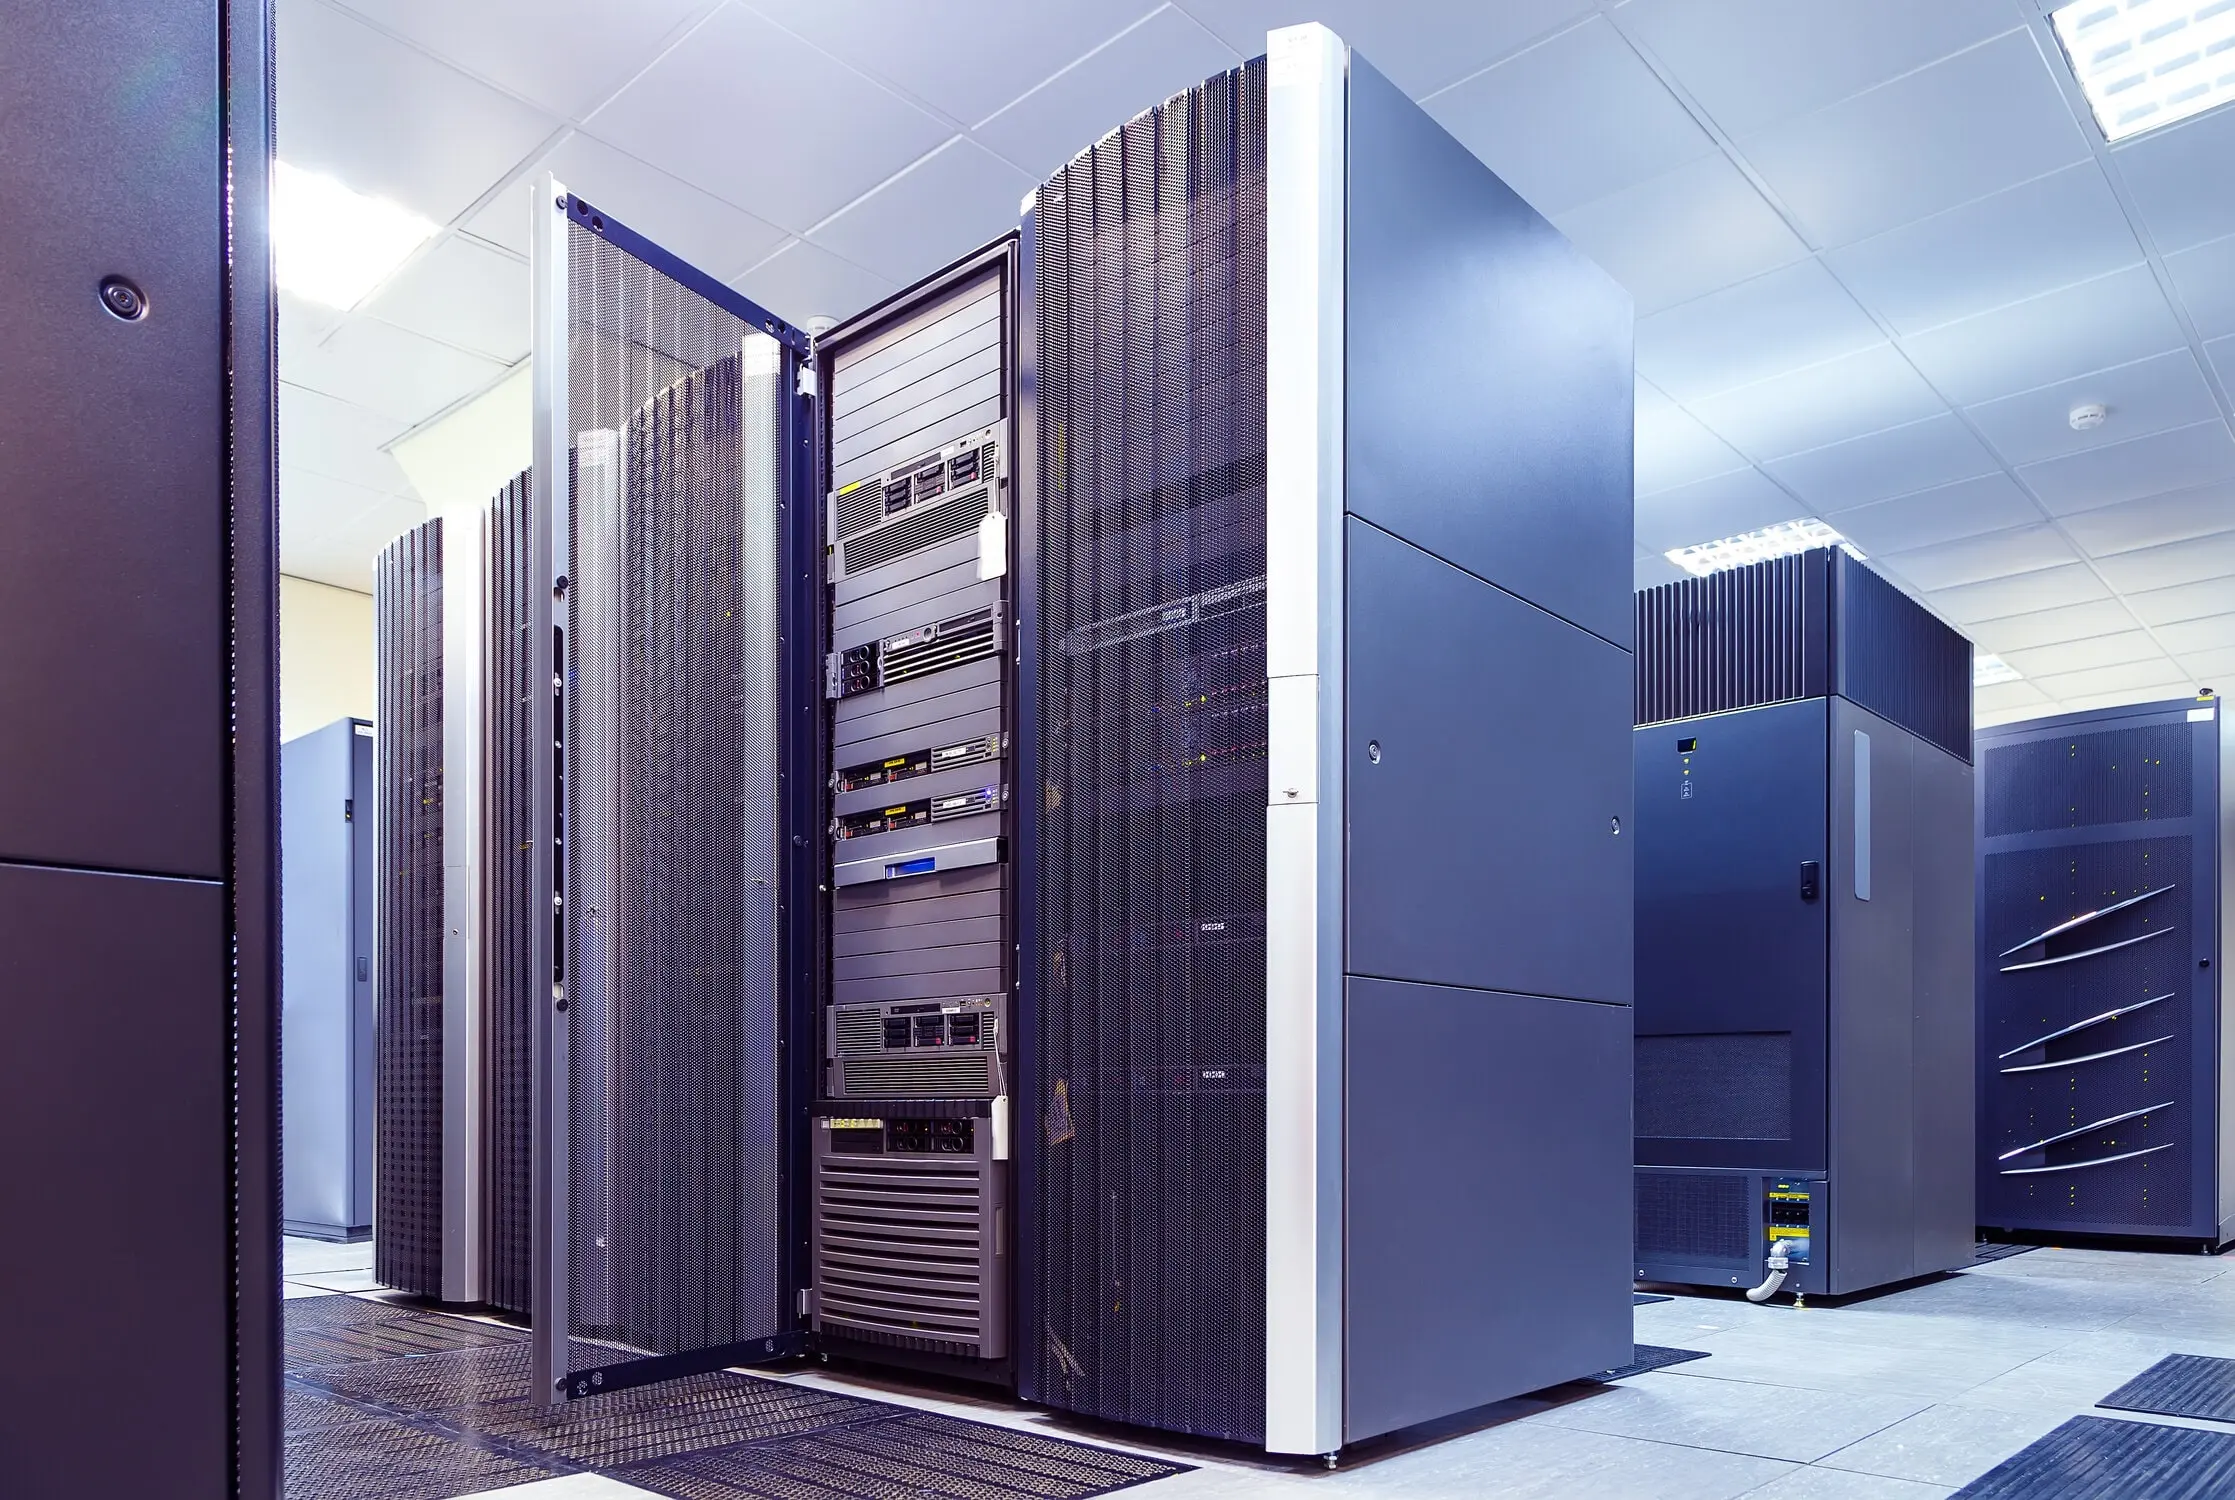 Globally distributed data centers